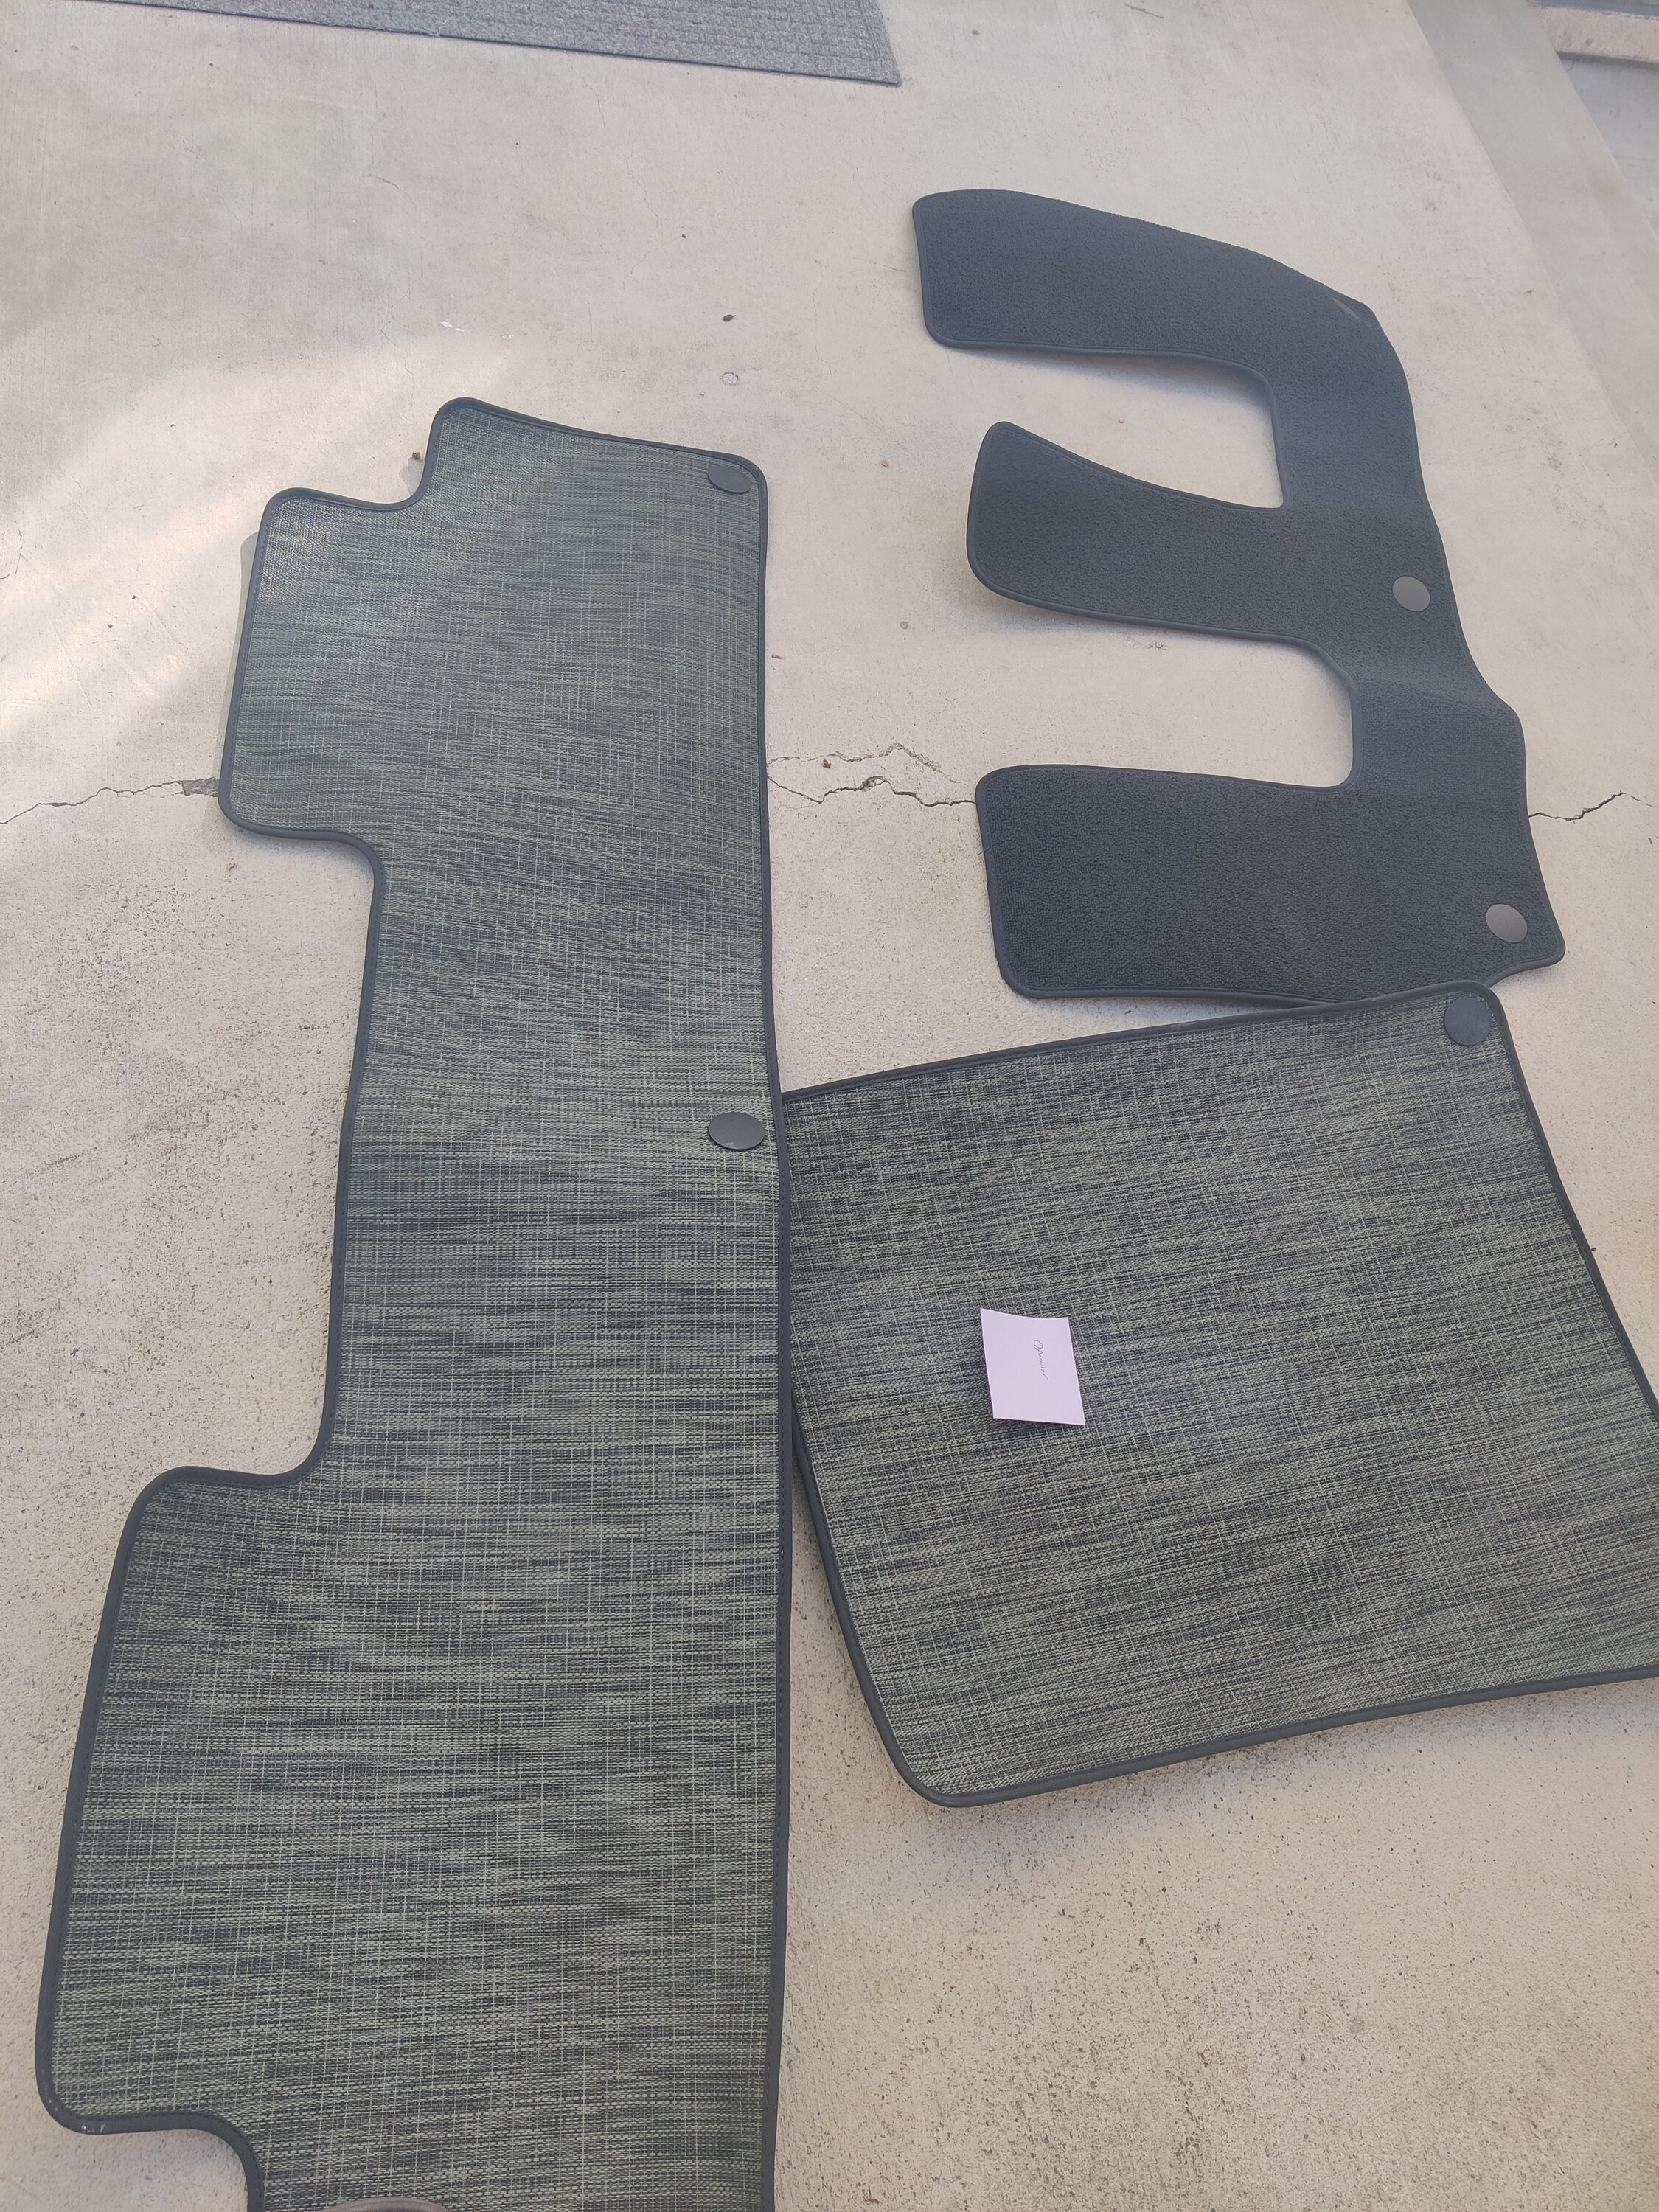 Rivian R1T R1S Stock chilliwich floormats green $40 IMG_20240217_151228